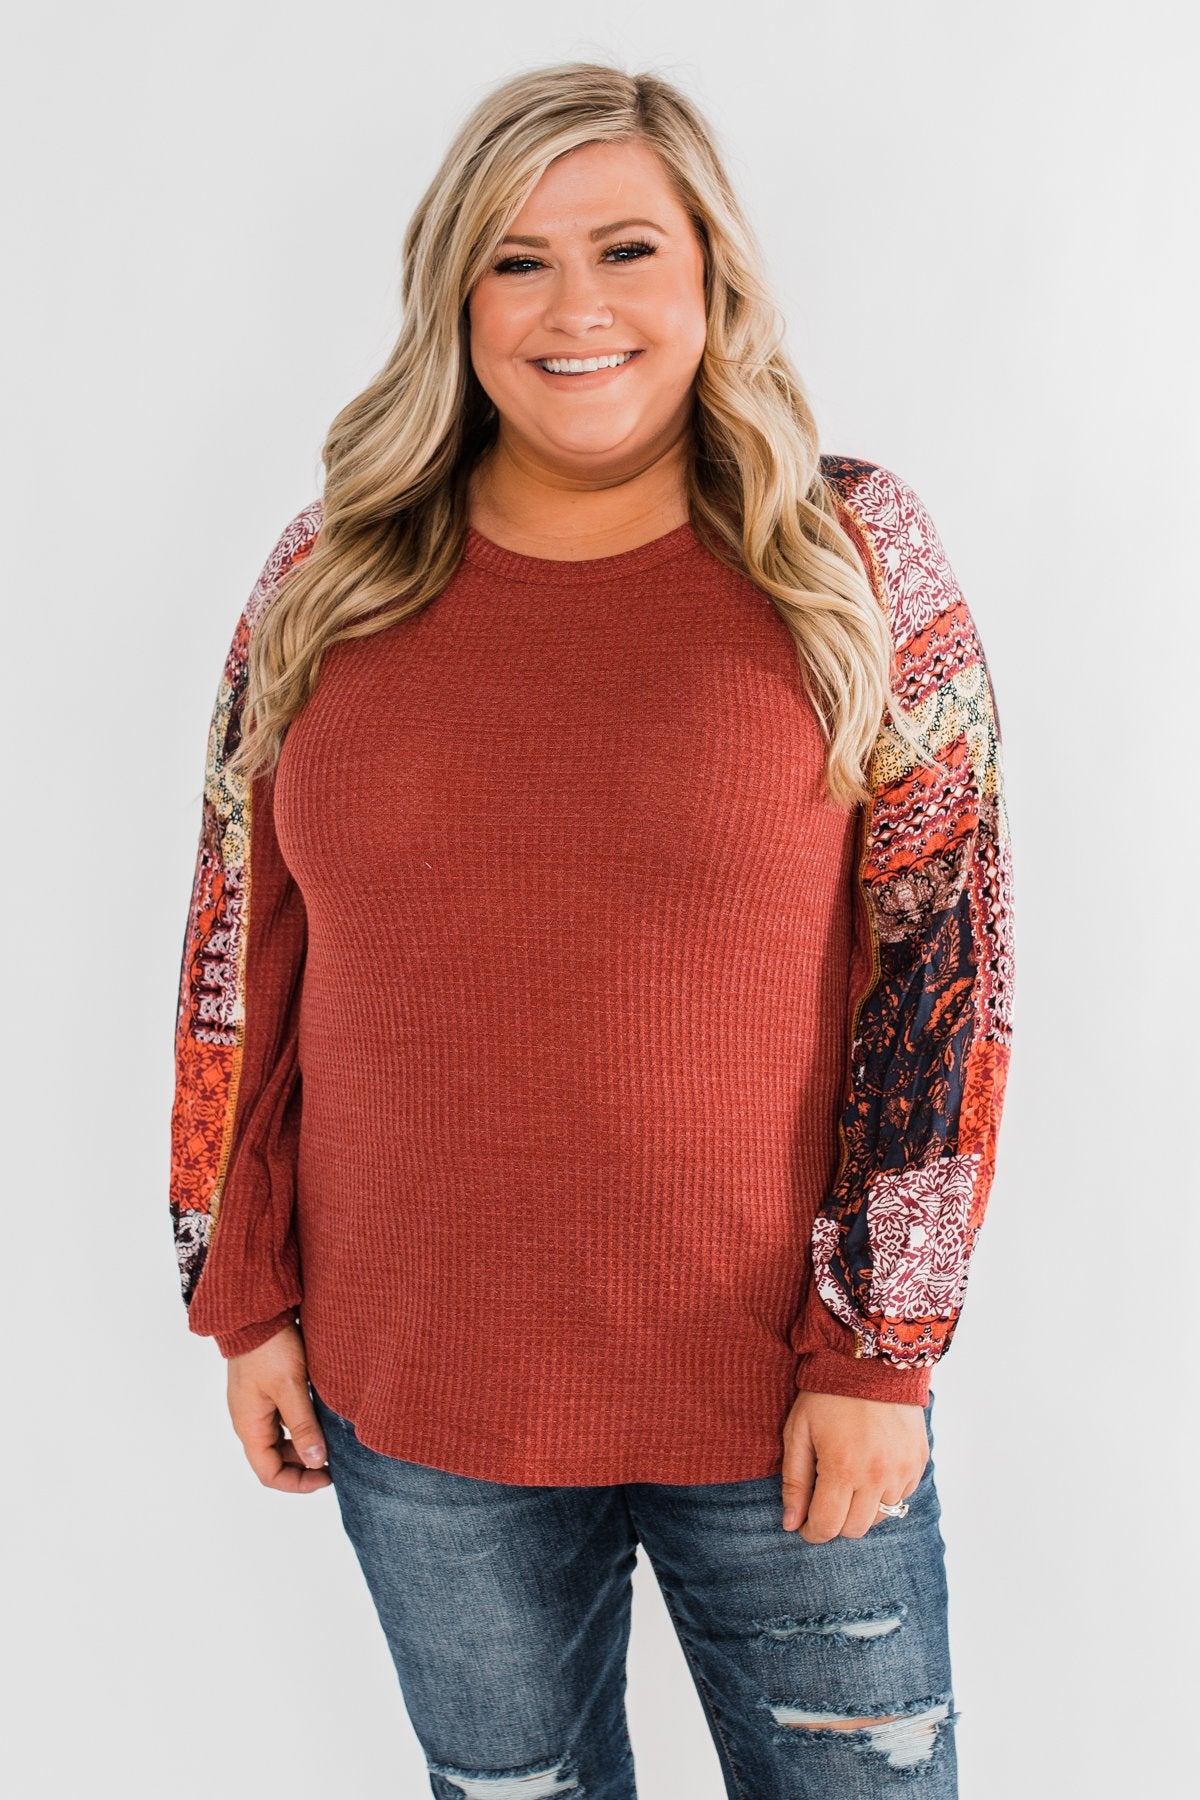 All To Myself Long Sleeve Top- Rust